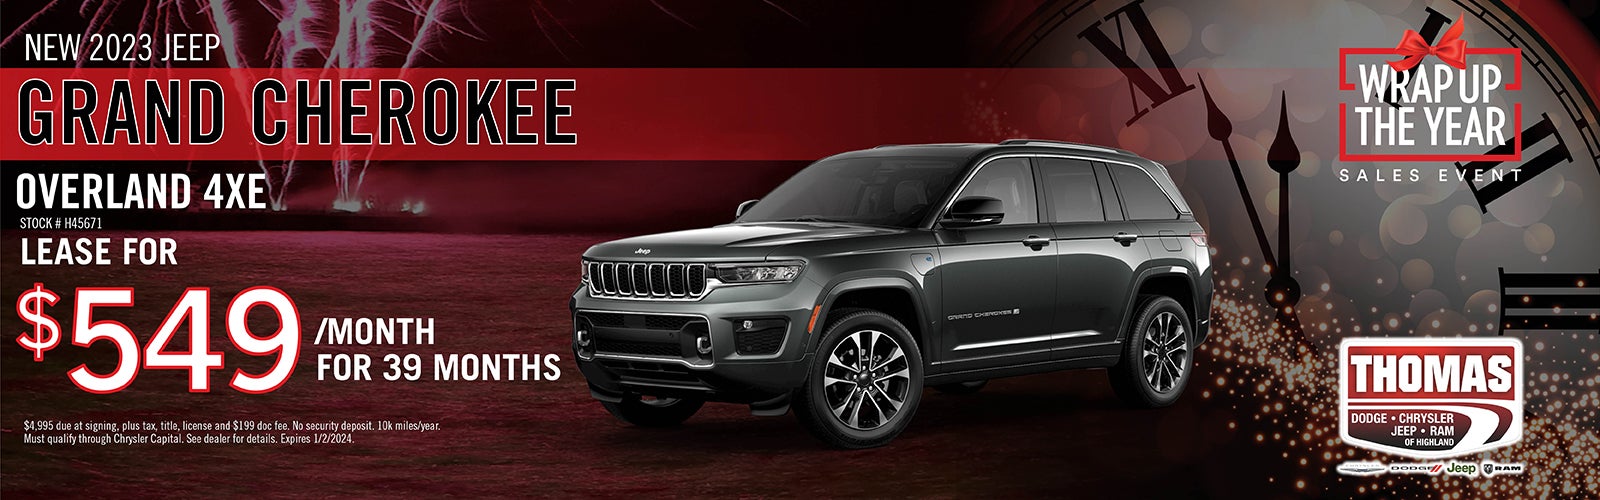 2023 Jeep Grand Cherokee Lease Offer